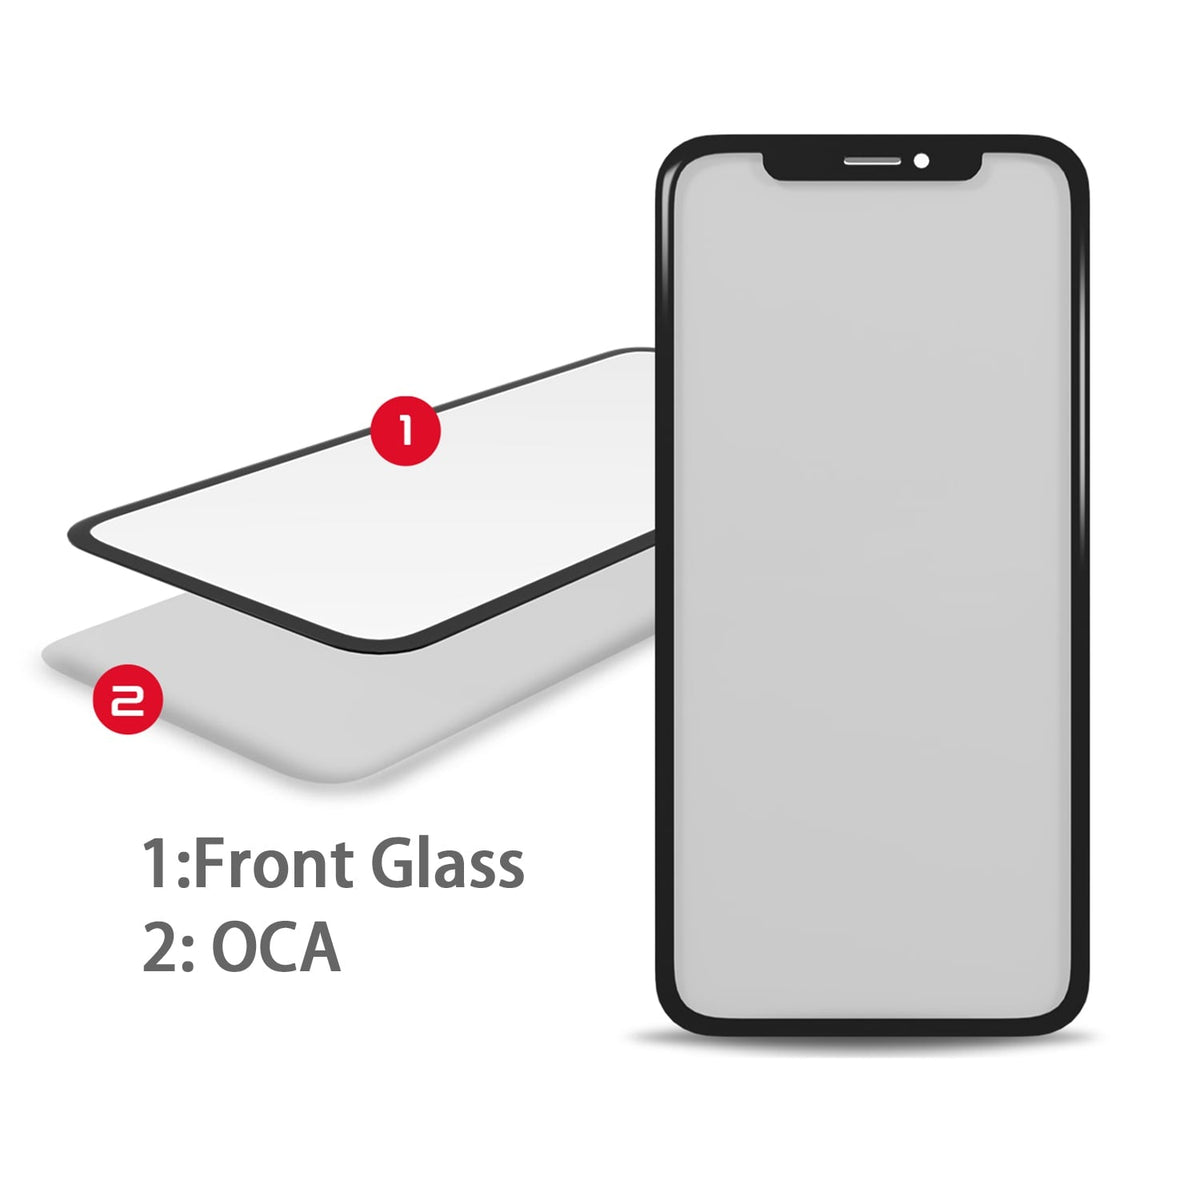 FRONT GLASS WITH OCA PREINSTALLED FOR IPHONE 12 PRO MAX / 12 PRO / 12